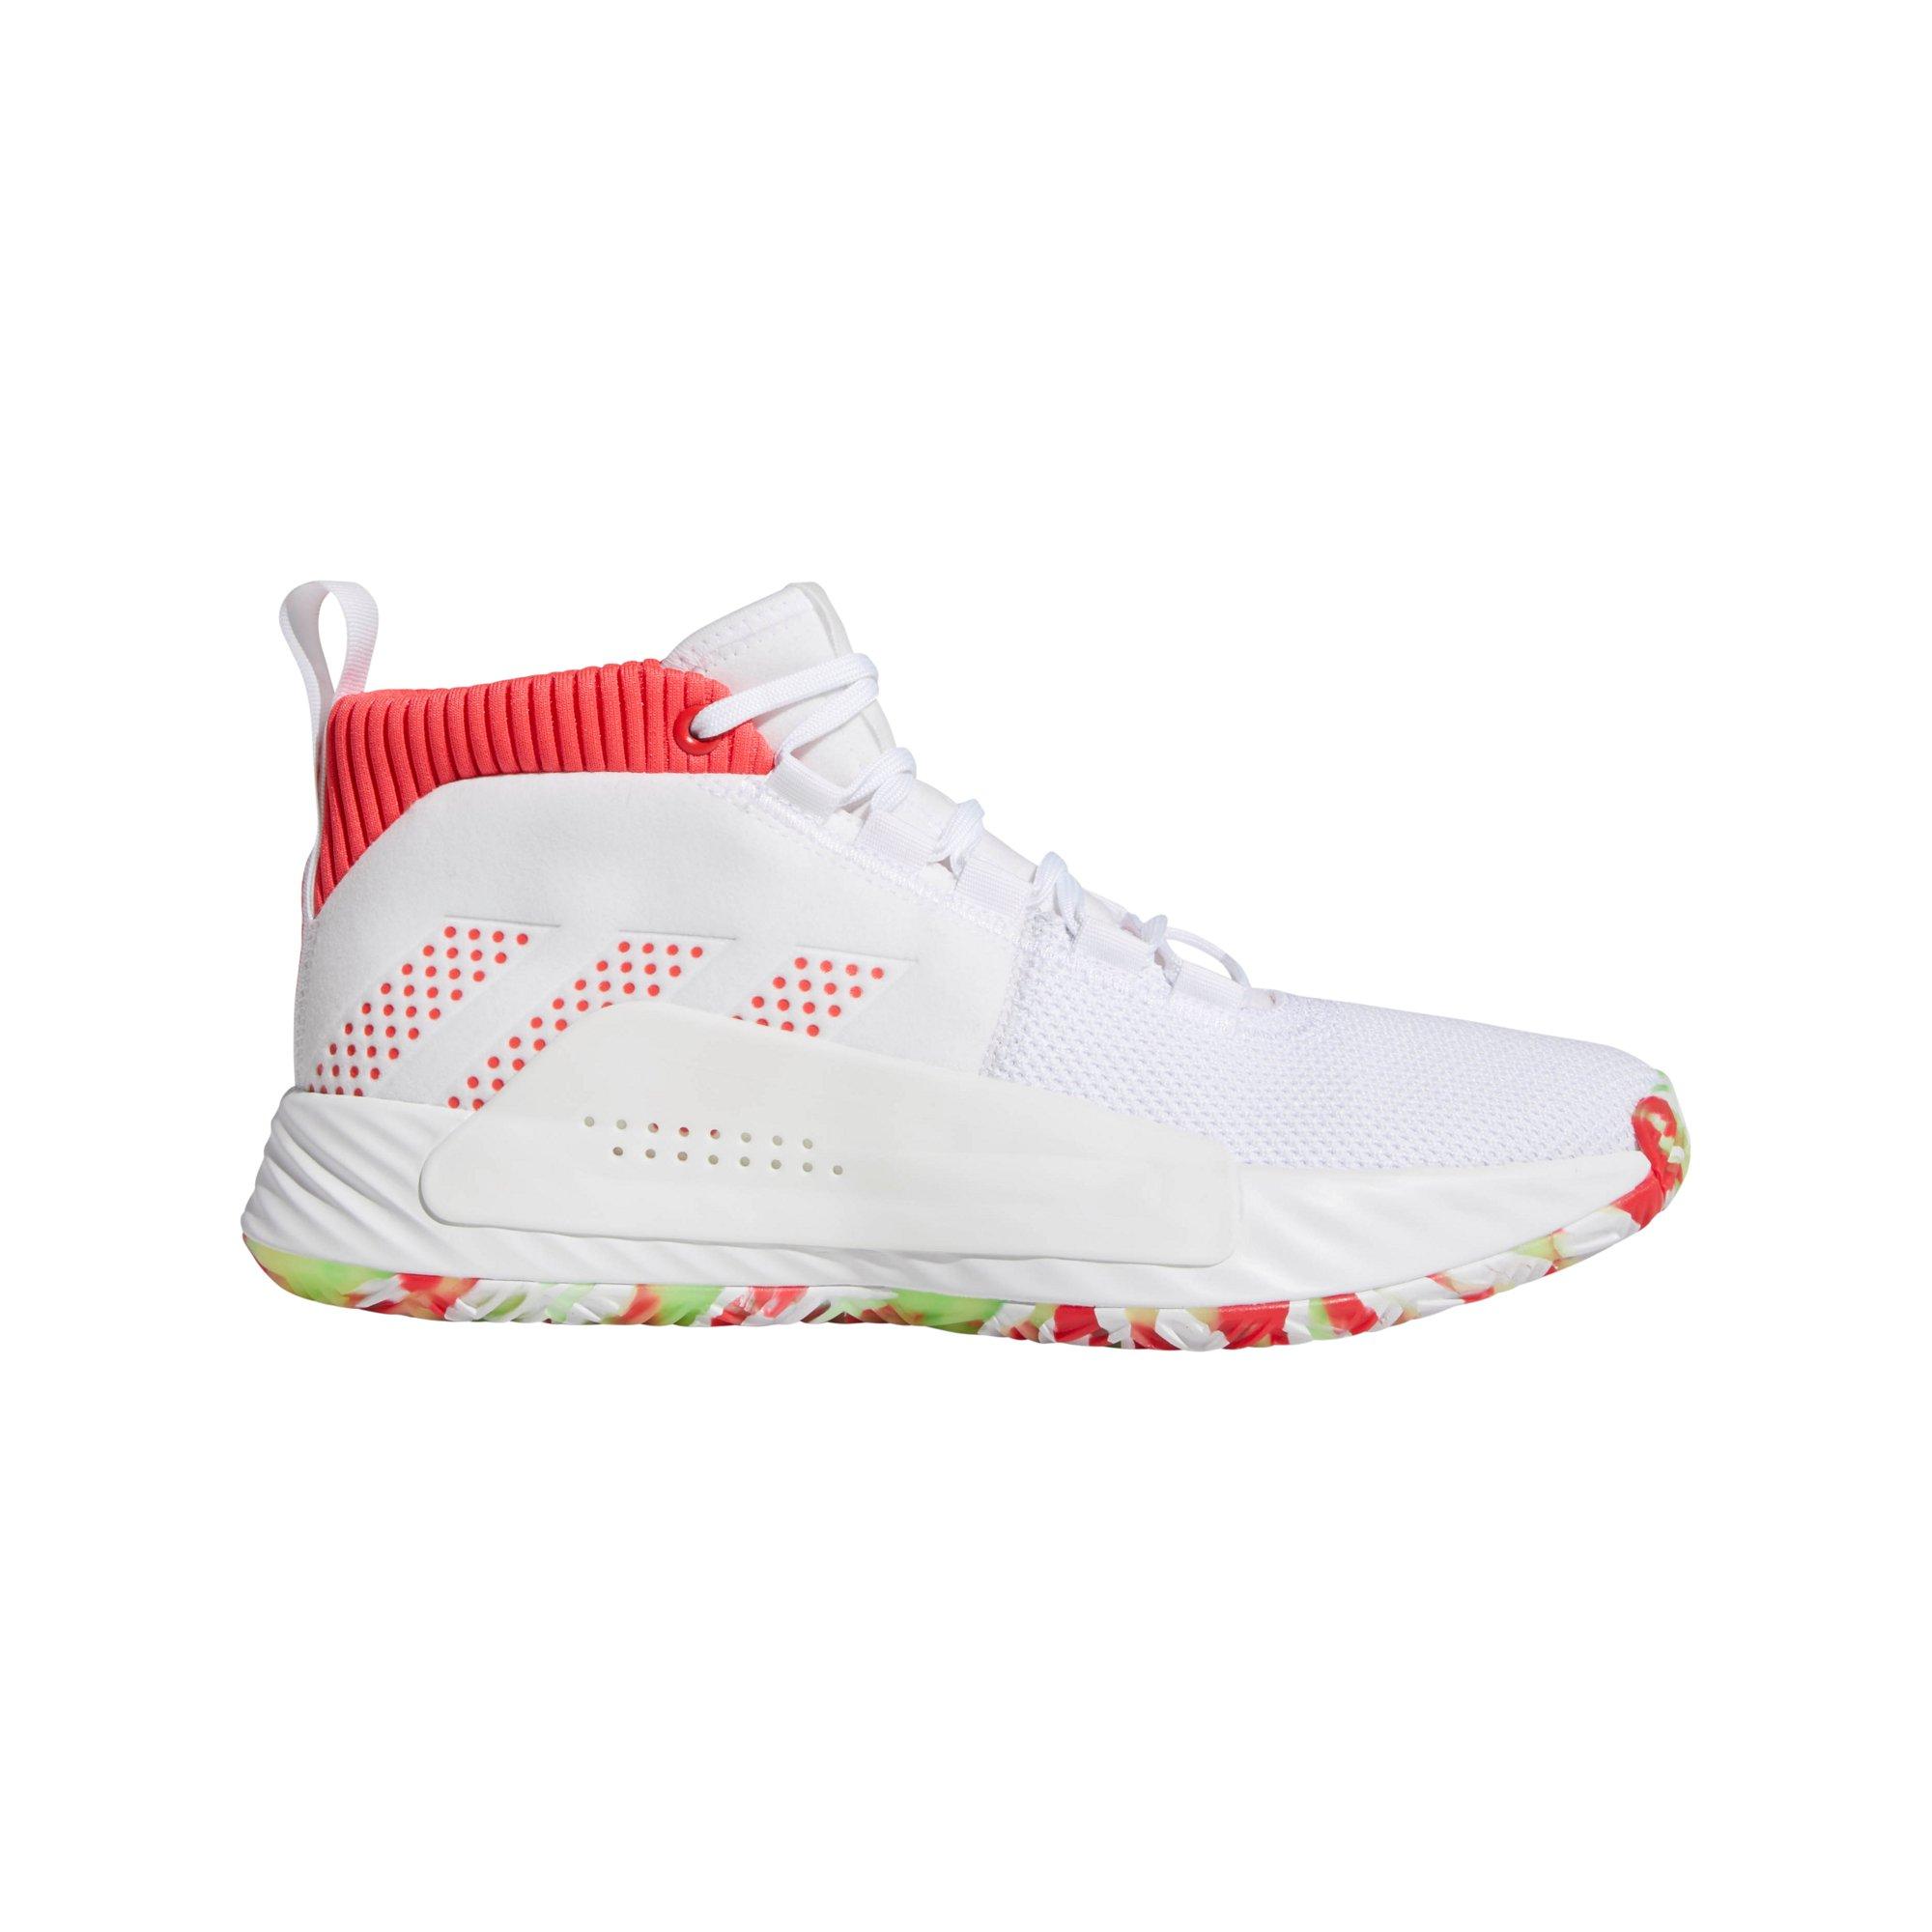 adidas red and white basketball shoes